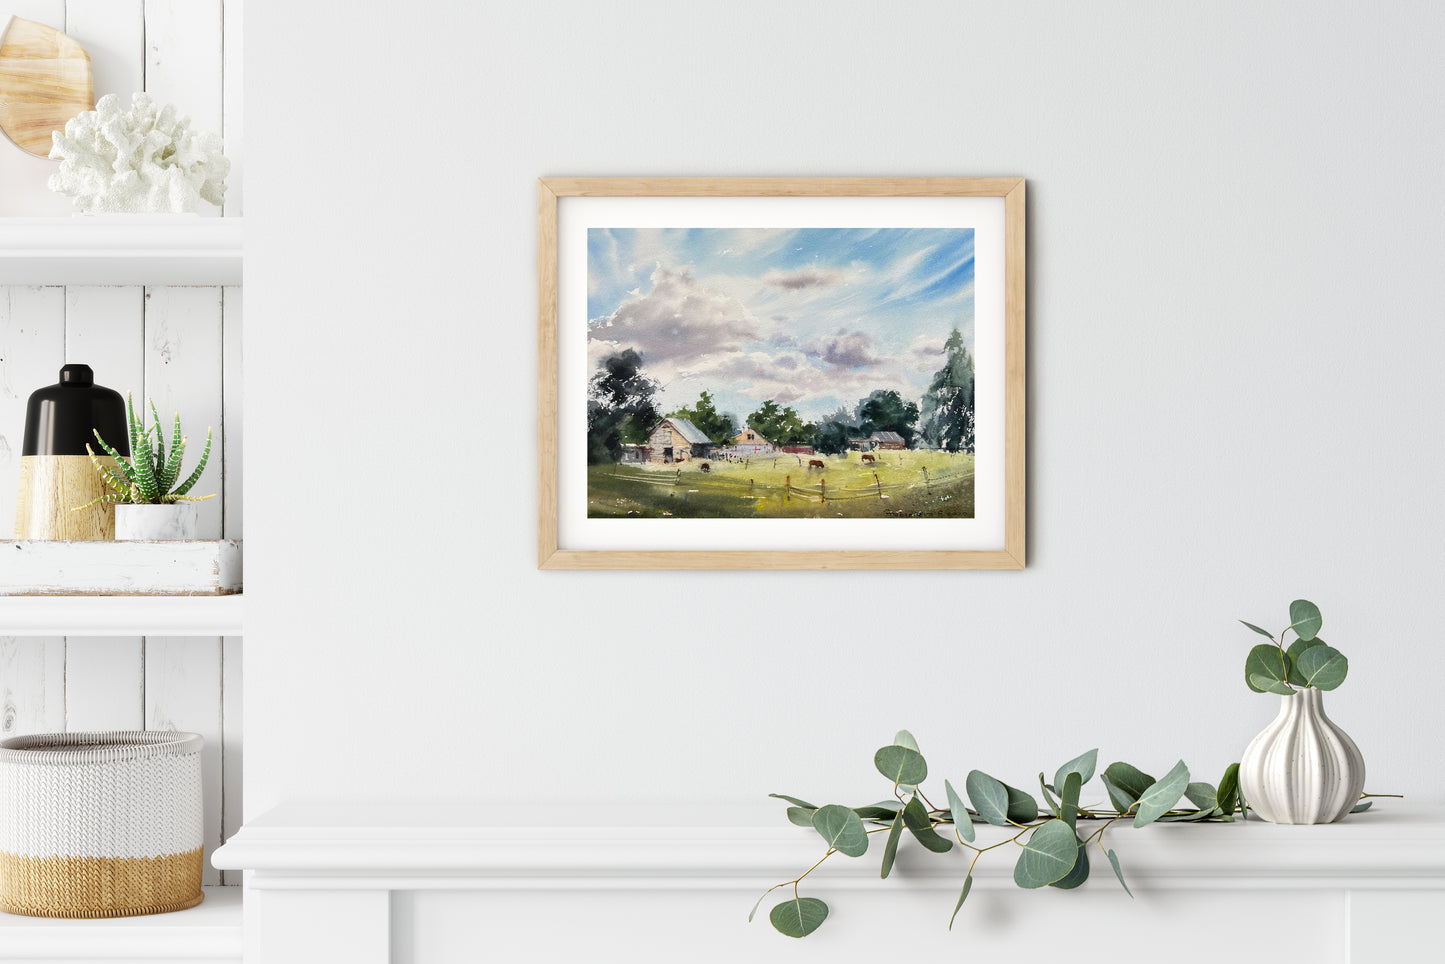 Summer Farm Painting Watercolor Original, Farmhouse Art Decor, Country Landscape With Cows & Barn, Scenery Painting